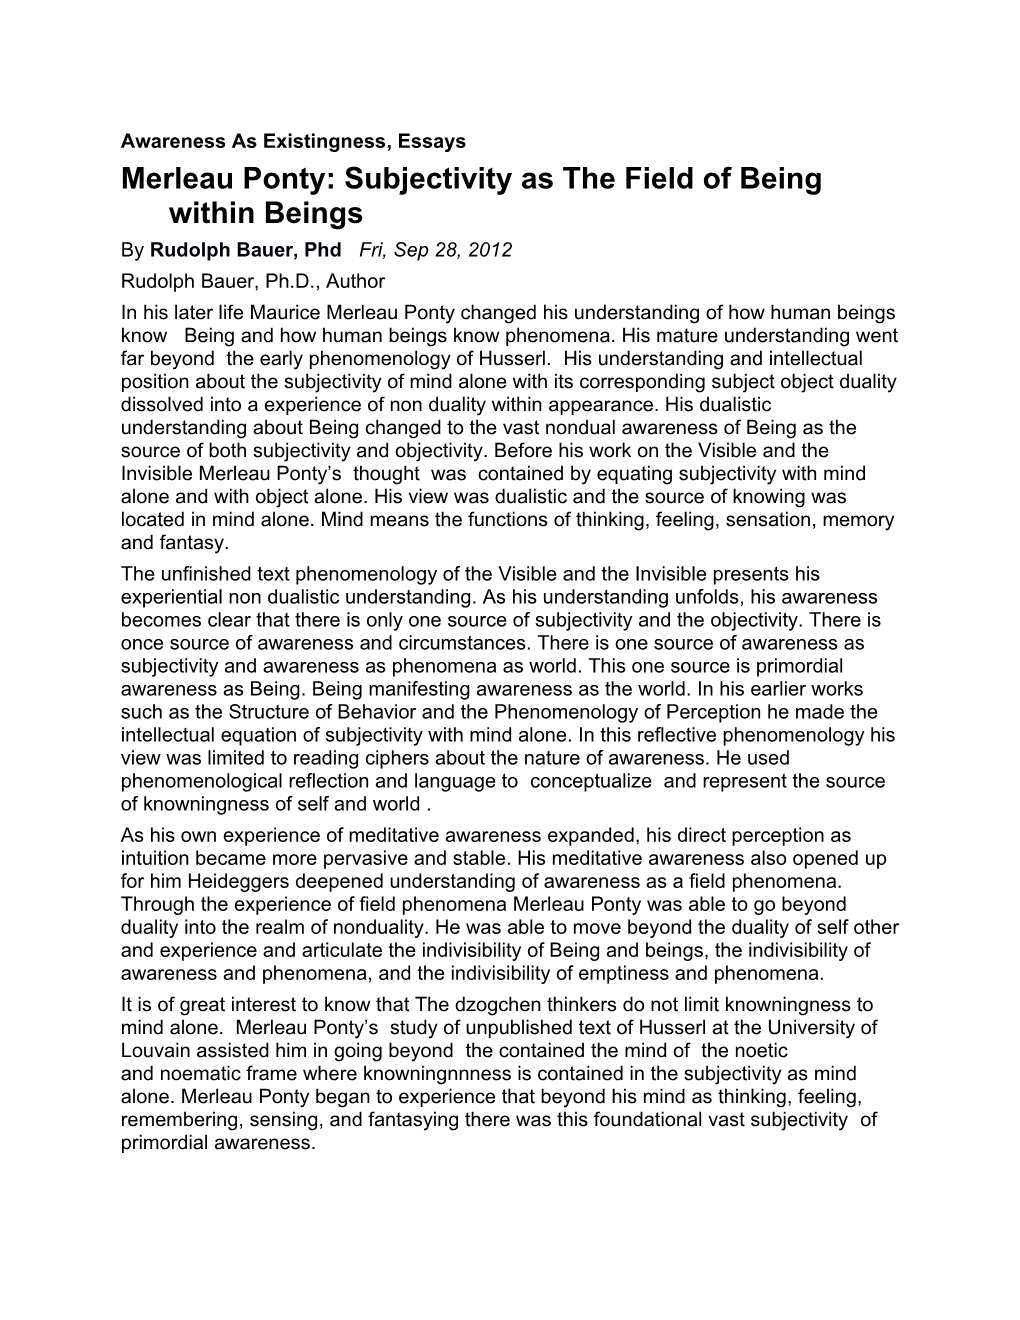 Merleauponty: Subjectivity As the Field of Being Within Beings